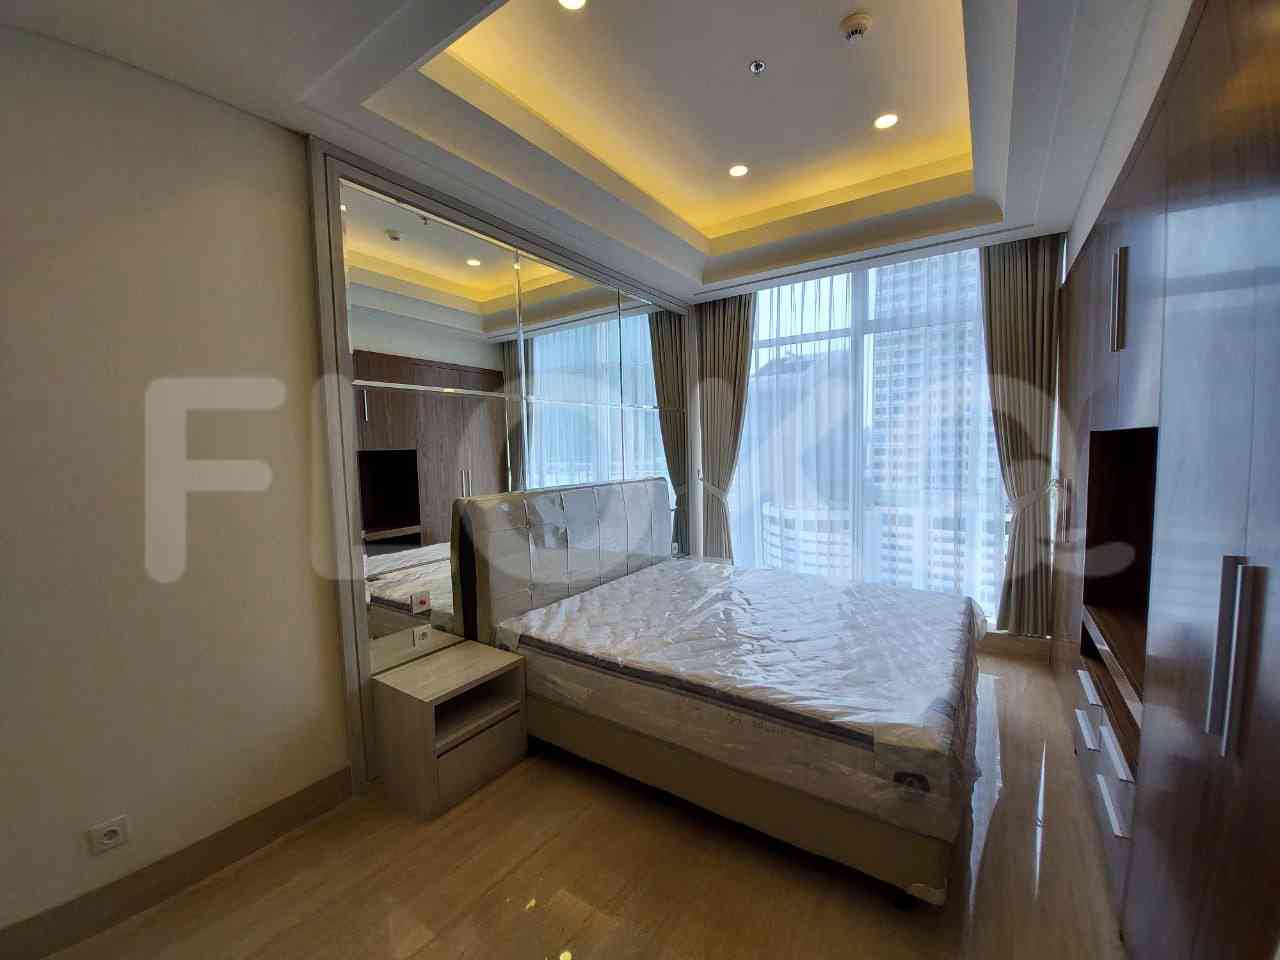 2 Bedroom on 20th Floor for Rent in South Hills Apartment - fku012 3